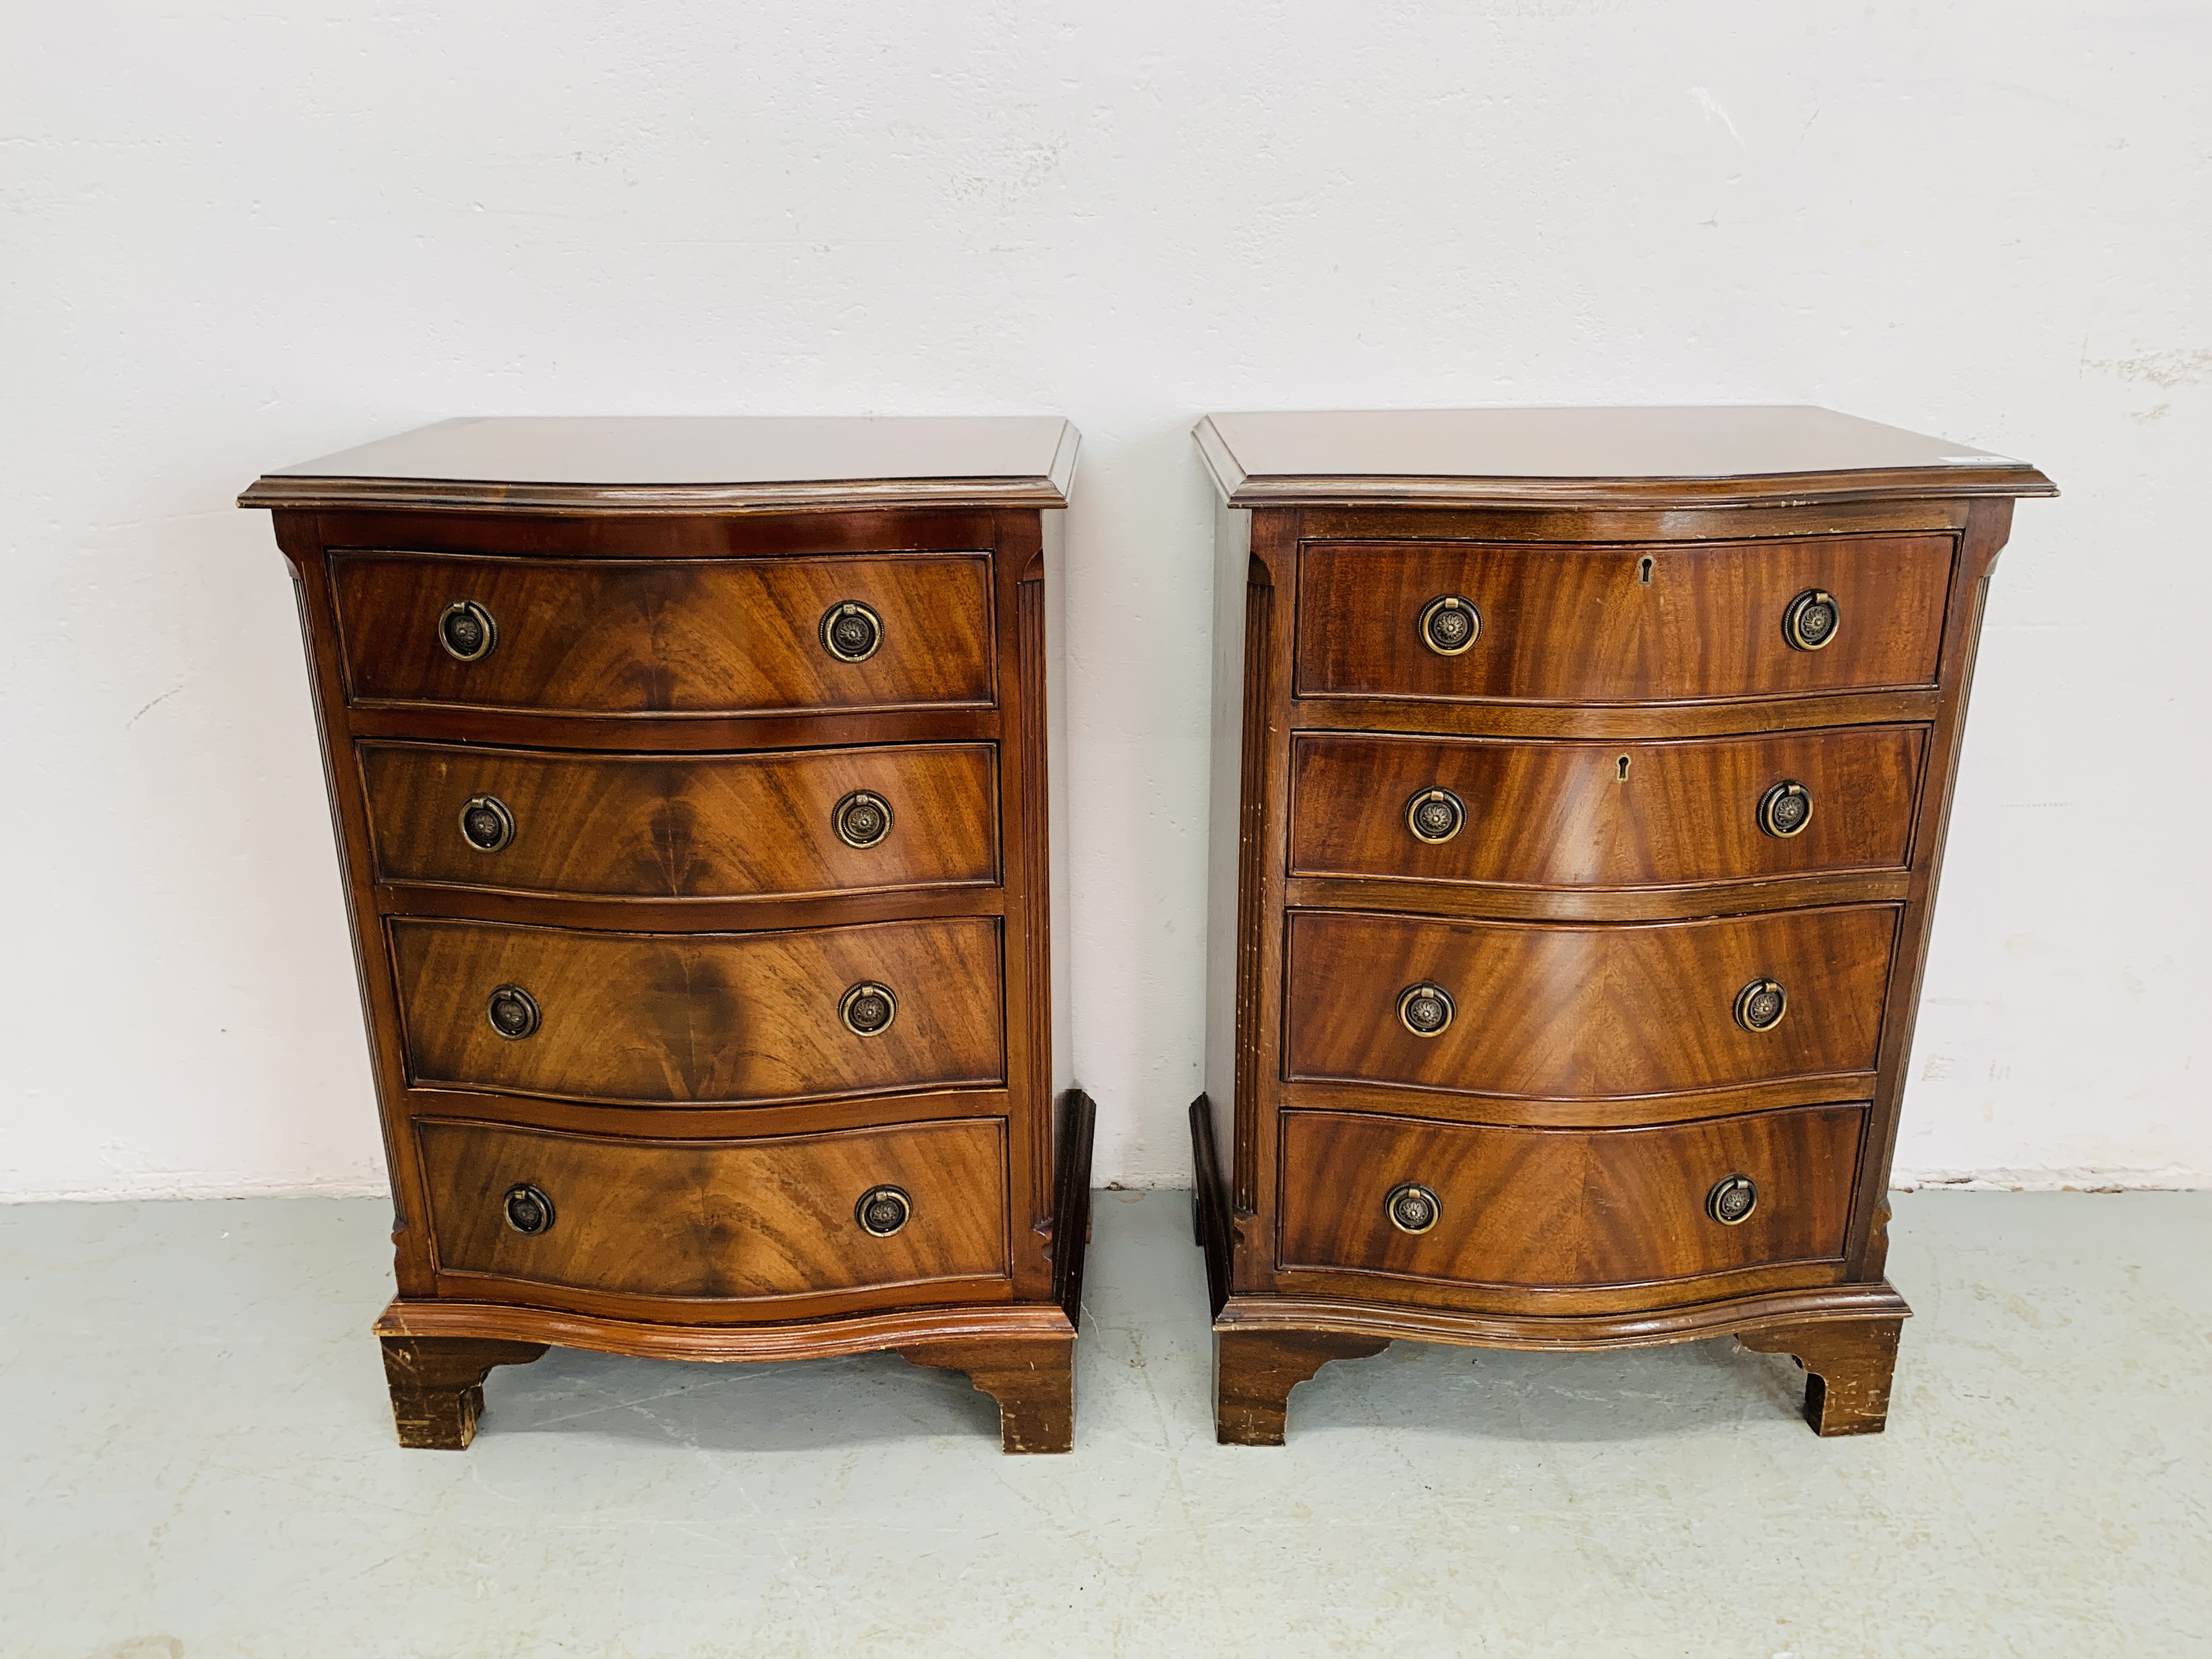 PAIR OF FLAME MAHOGANY FOUR DRAWER CHESTS - W 49CM. D 36CM. H 70CM.